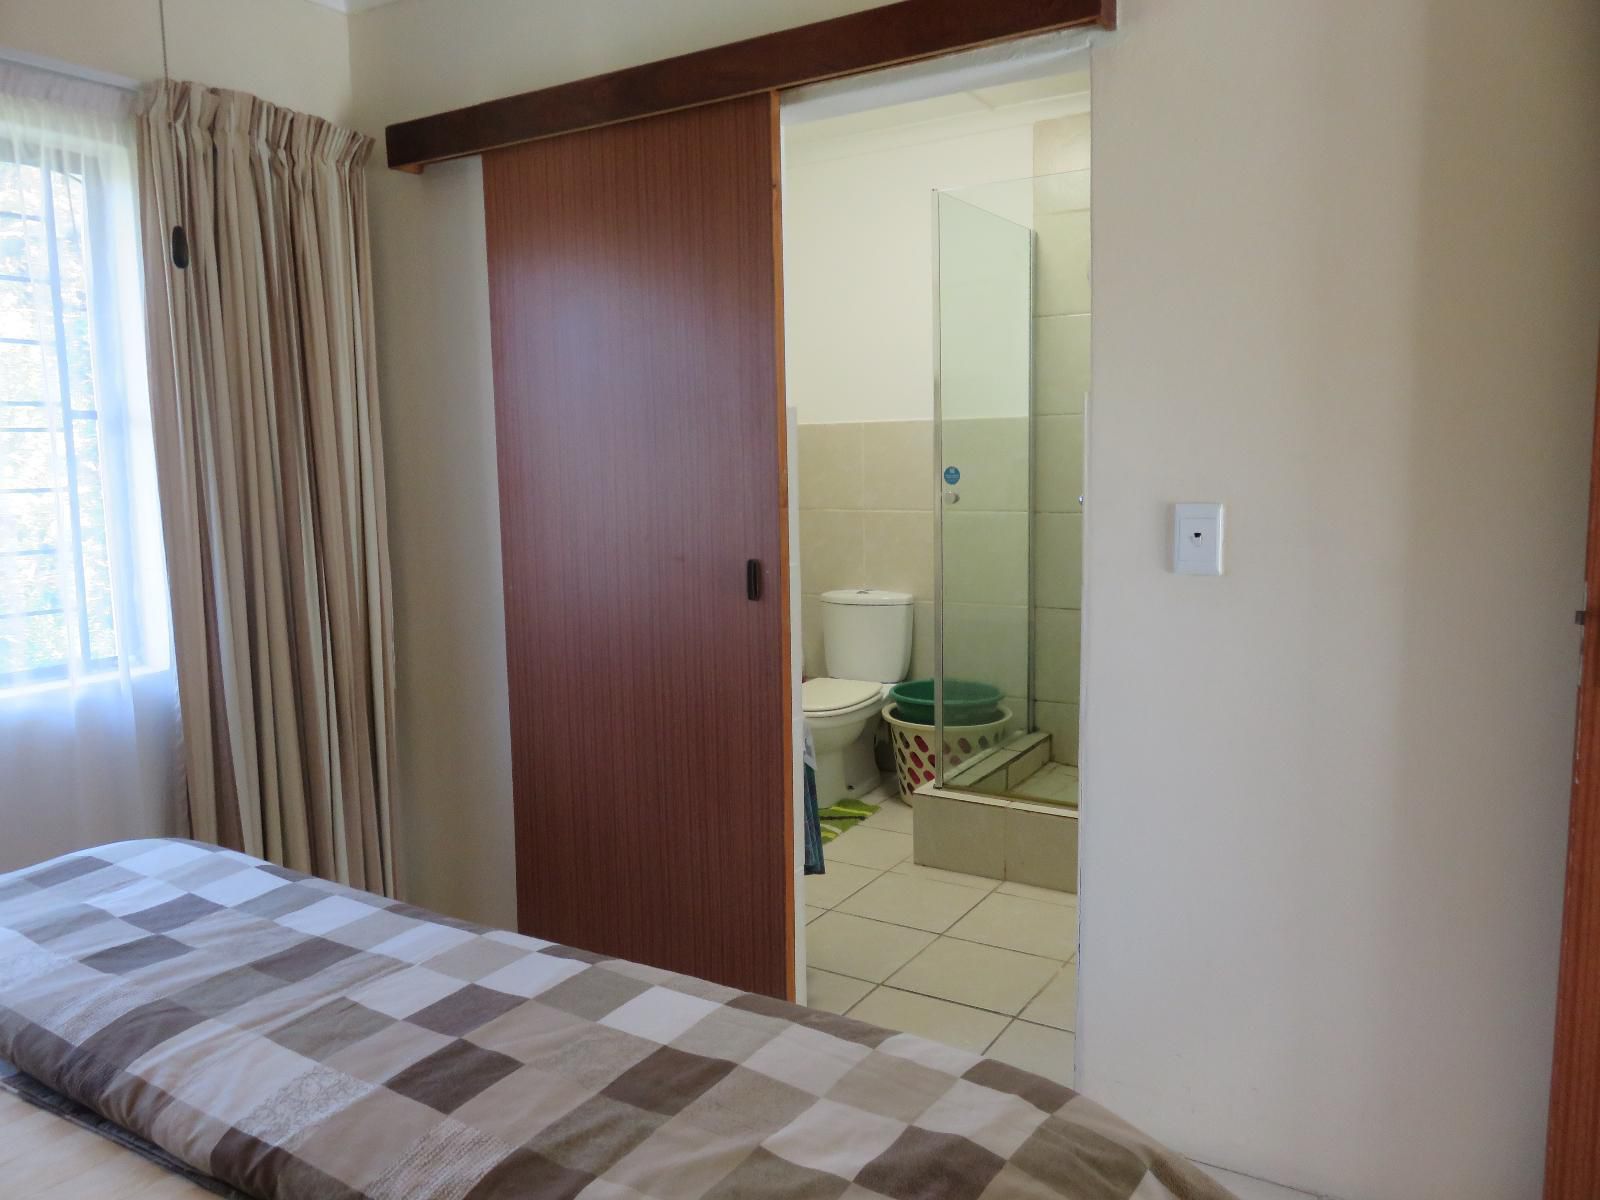 40 Winks Accommodation Somerset West Western Cape South Africa Bathroom